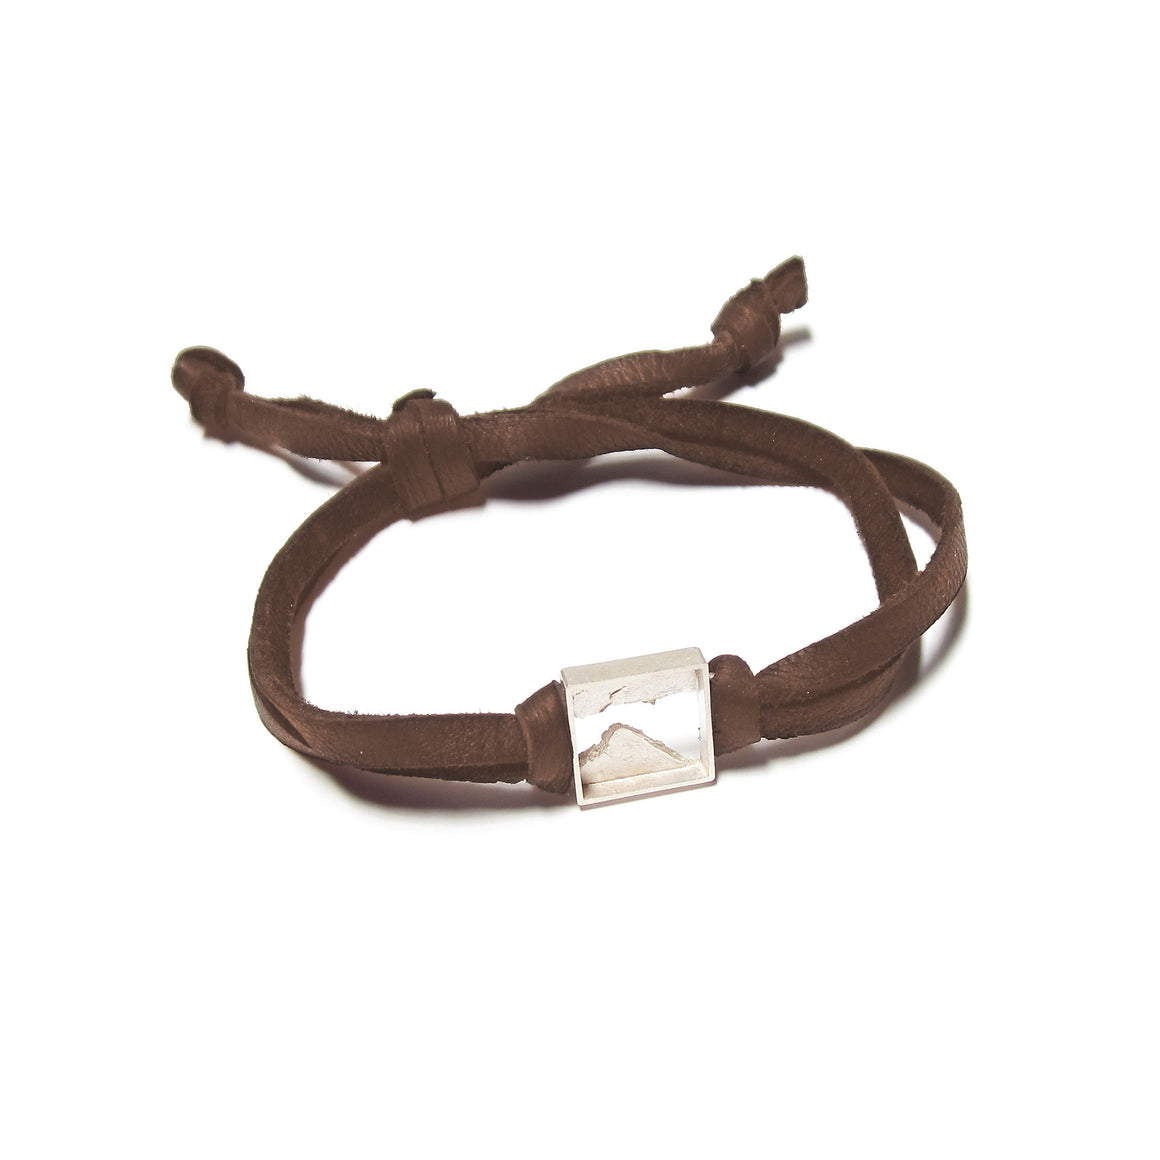 Seth Papac Torn Bracelet in sterling silver and brown leather